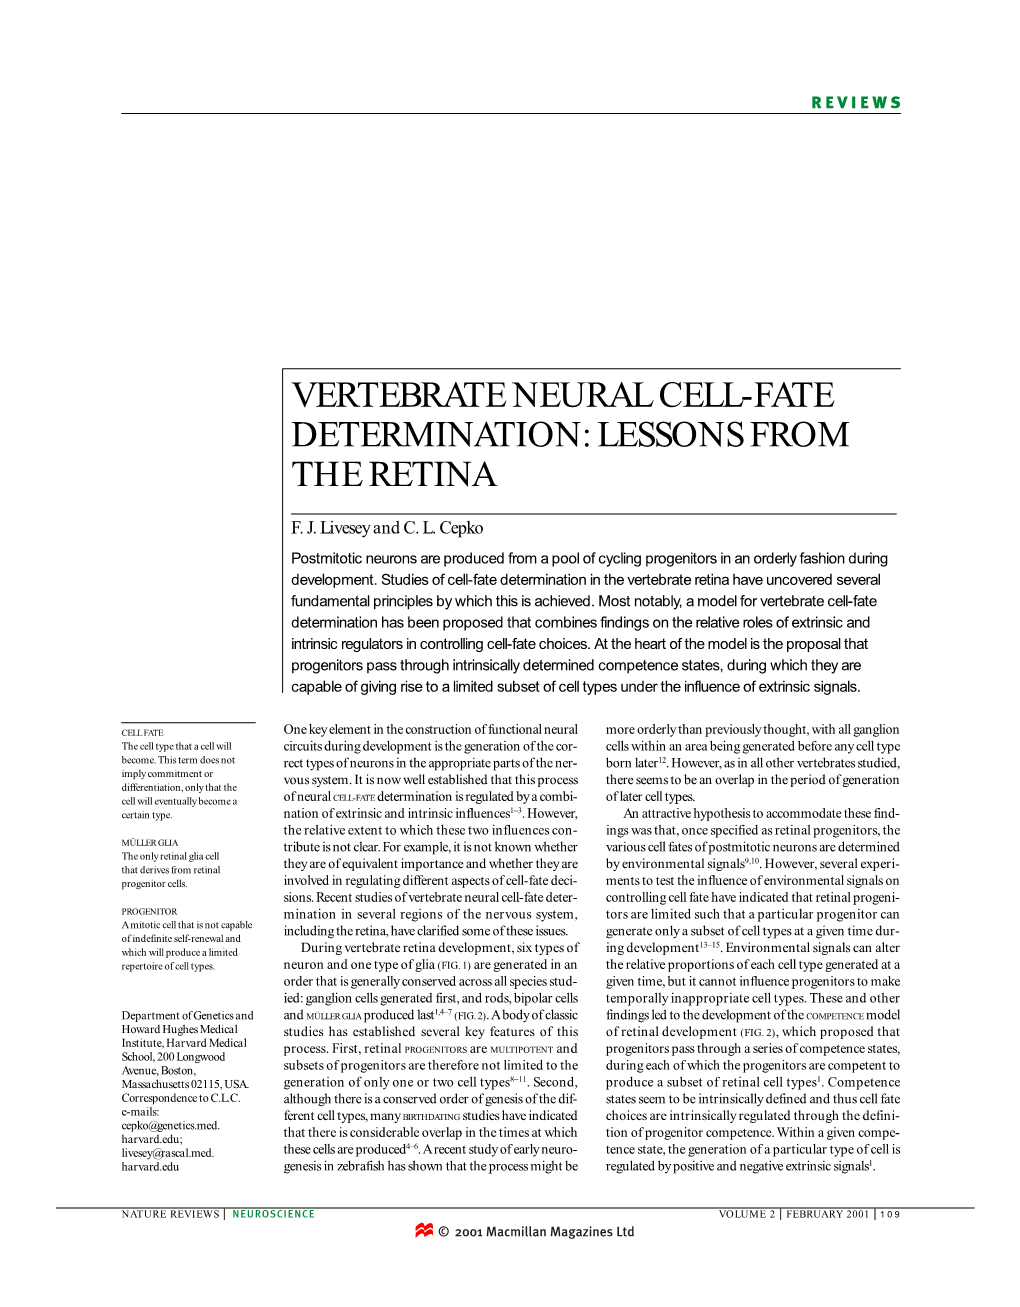 Vertebrate Neural Cell-Fate Determination: Lessons from the Retina